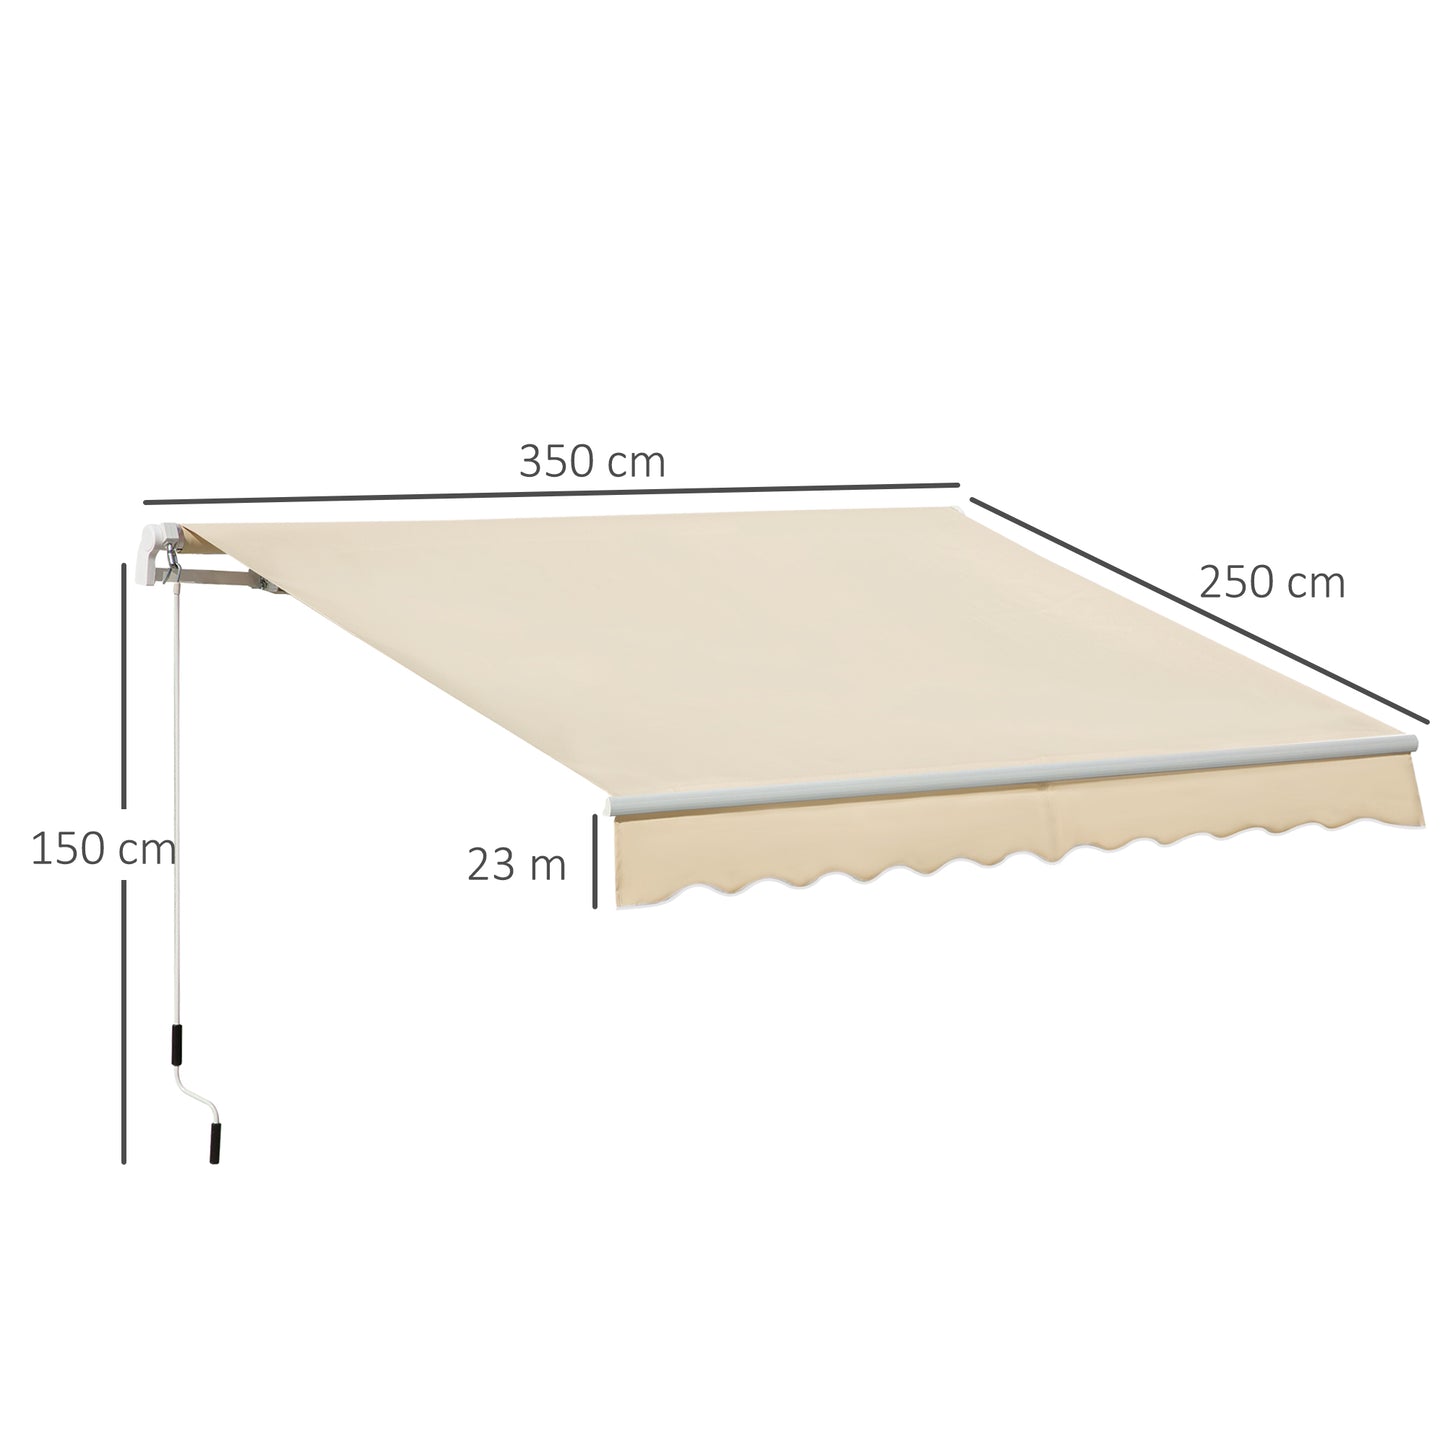 Outsunny 3.5M x 2.5M Manual Awning Canopy Retractable Sun Shade Shelter Winding Handle for Garden Patio Beige